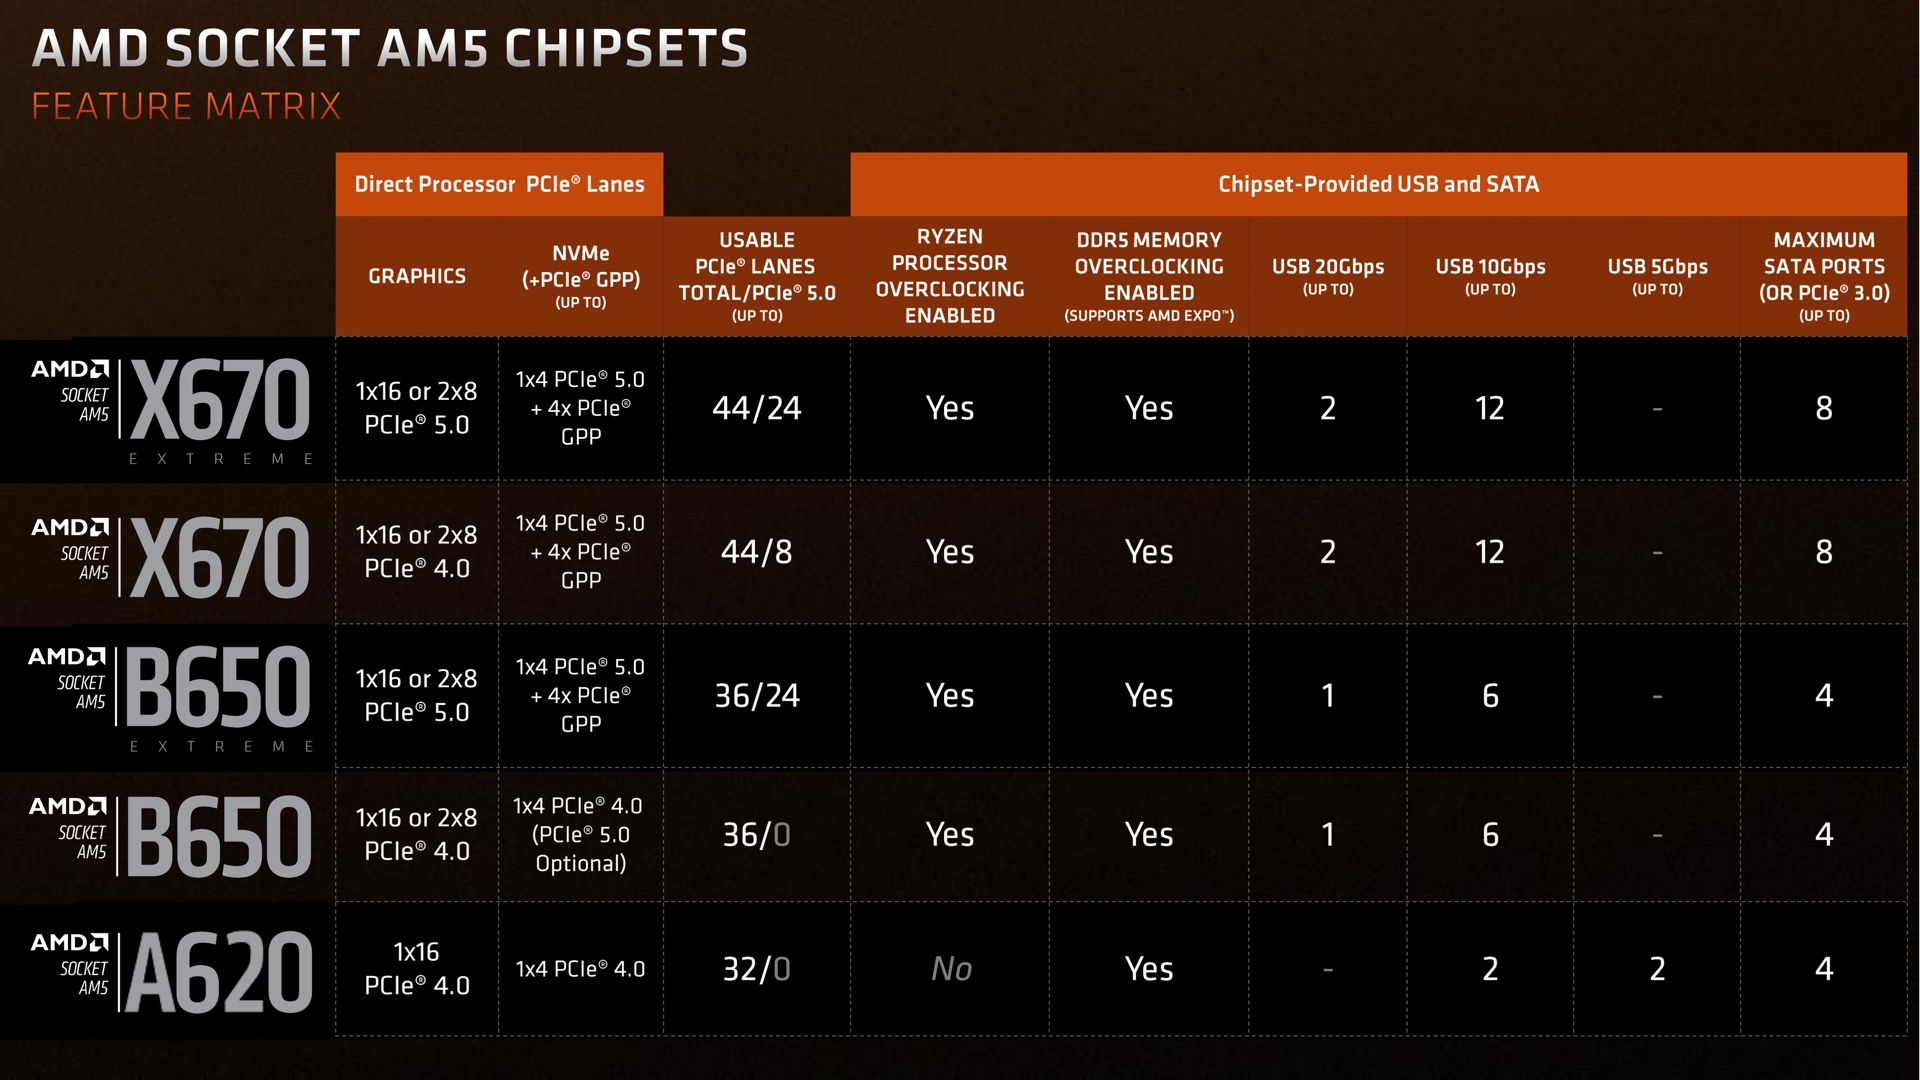 A table showing spec information for the A620 motherboard chipset compared to the X670 and B650 chipsets.